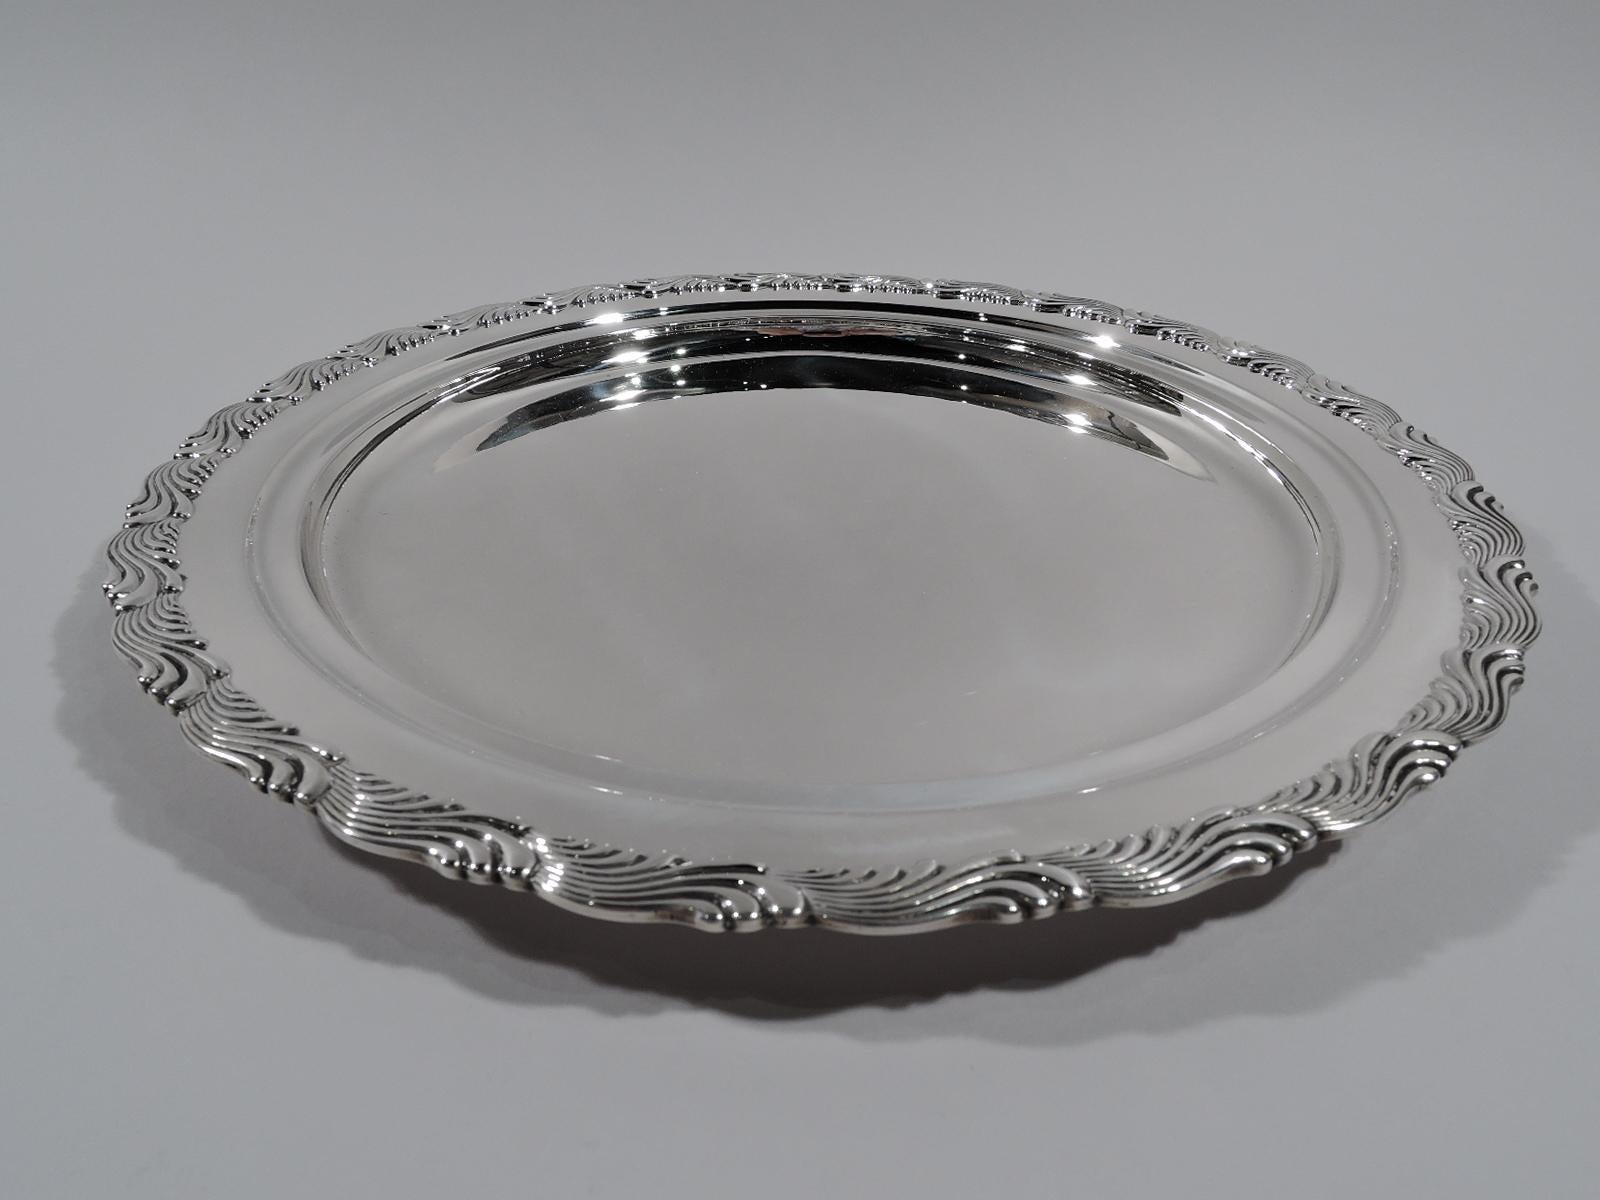 Edwardian sterling silver tray. Made by Tiffany & Co. in New York. Deep well and stepped shoulder. Rim interior has chased border in form of imbricated leaves or chevrons. A popular motif that is sometimes known as Wave Edge. Stylish and